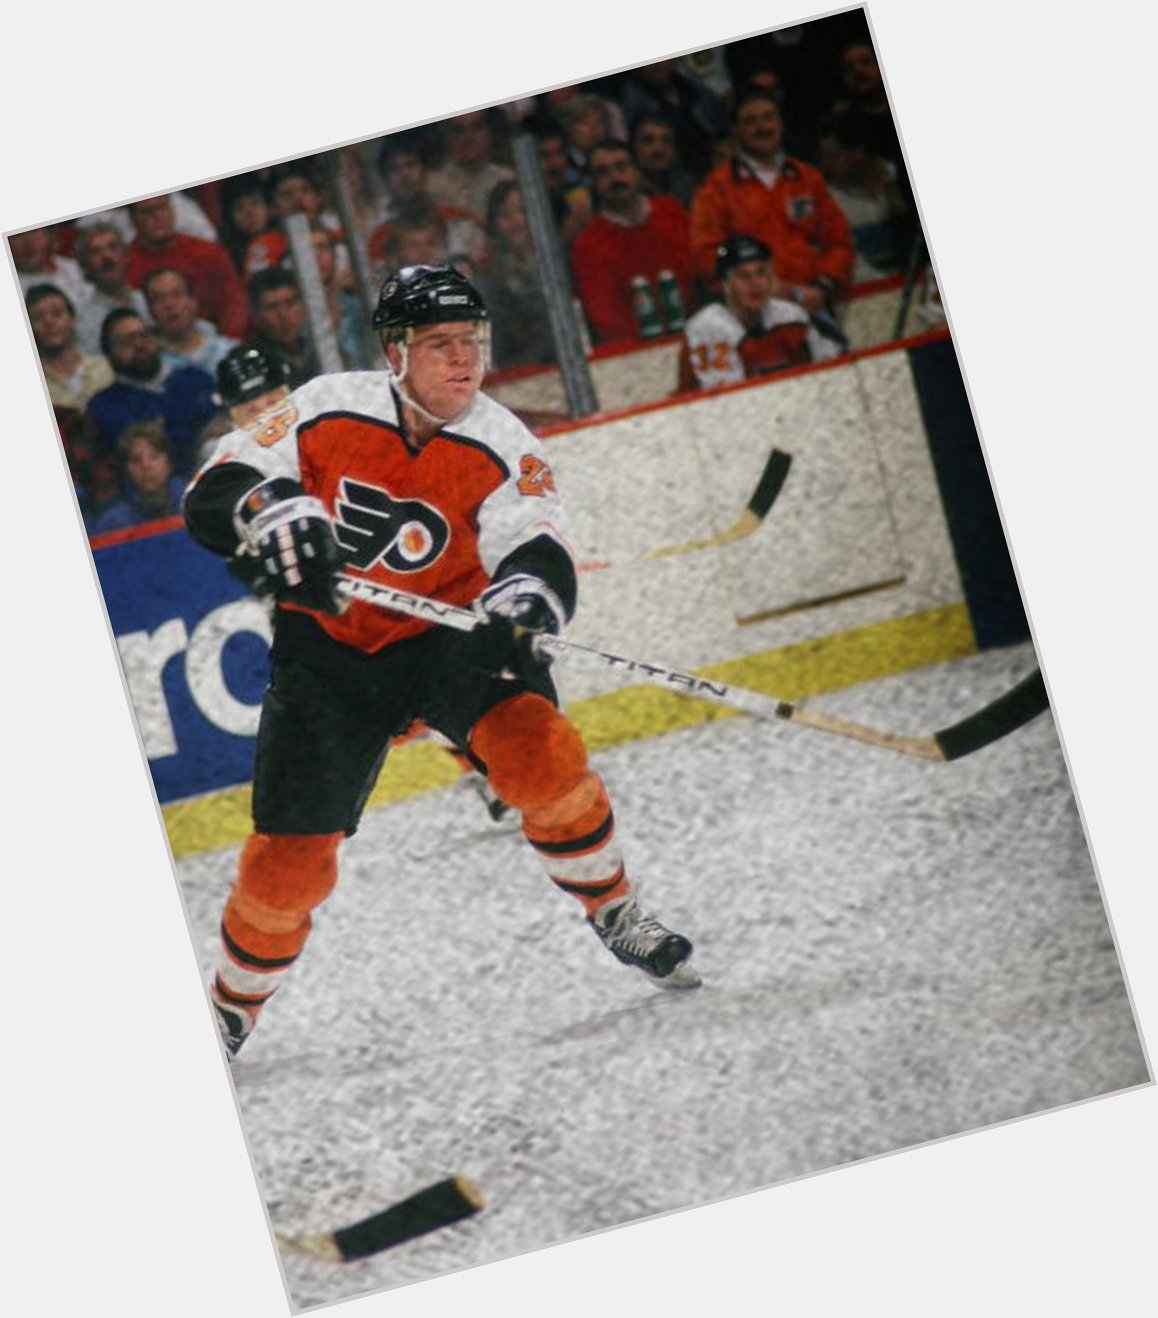 Happy birthday Brian Propp, born on this day in 1959.   